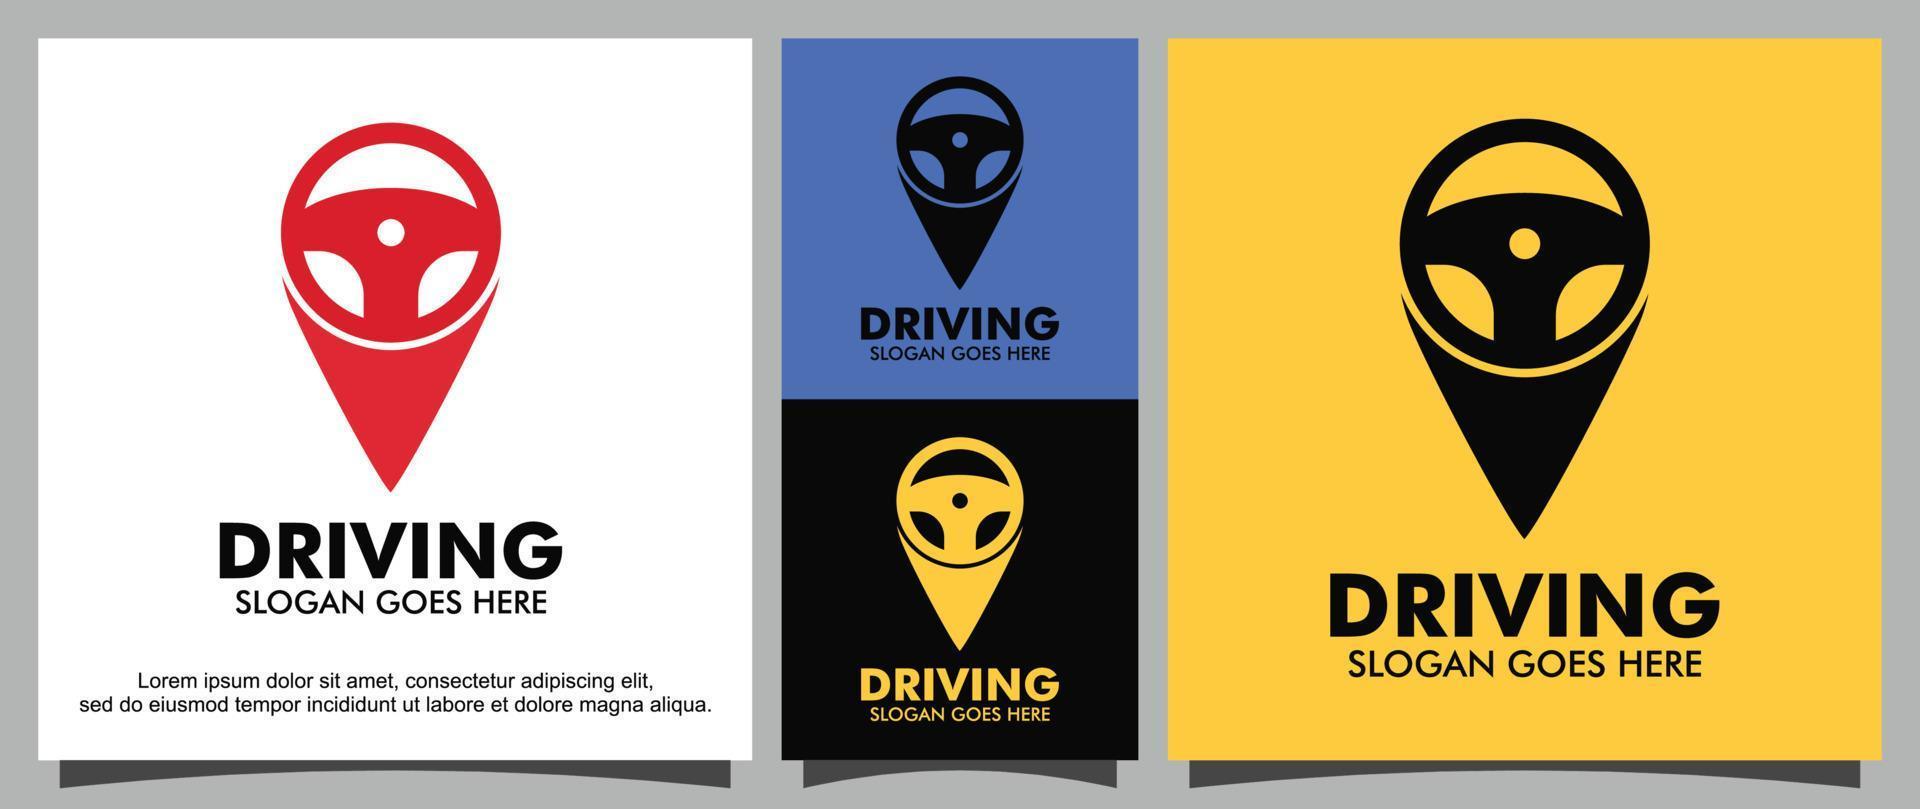 Steering wheel logo and location design template vector